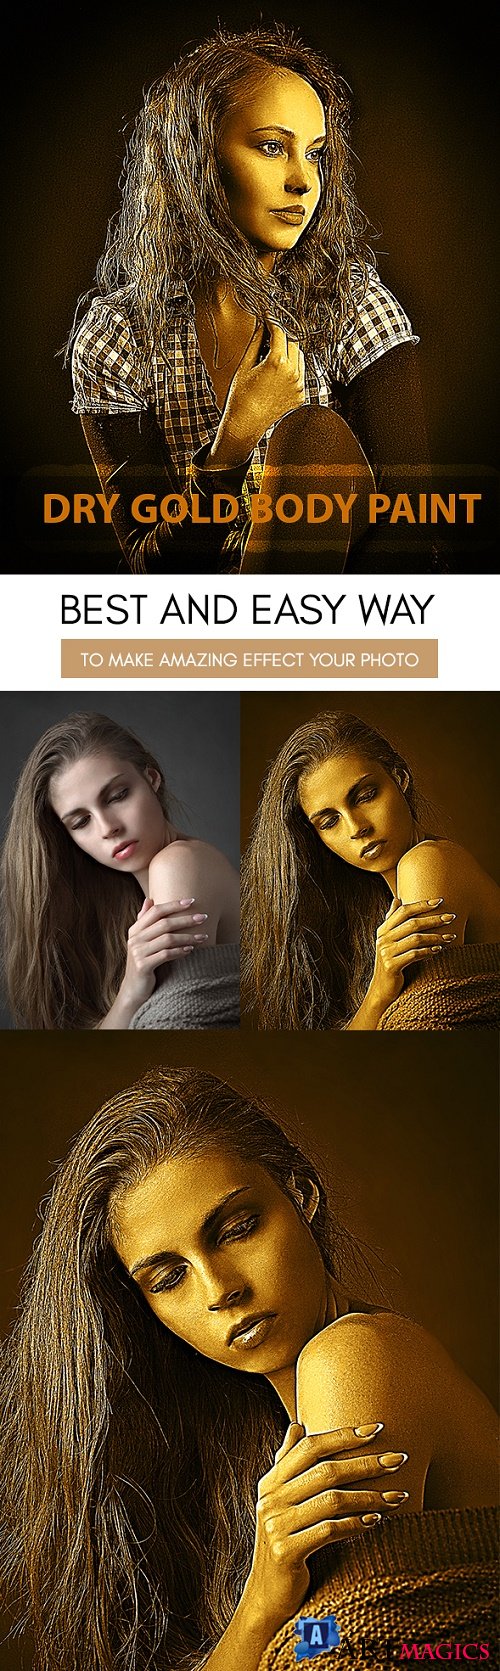 Dry Gold Body Paint Photoshop Action 21885249